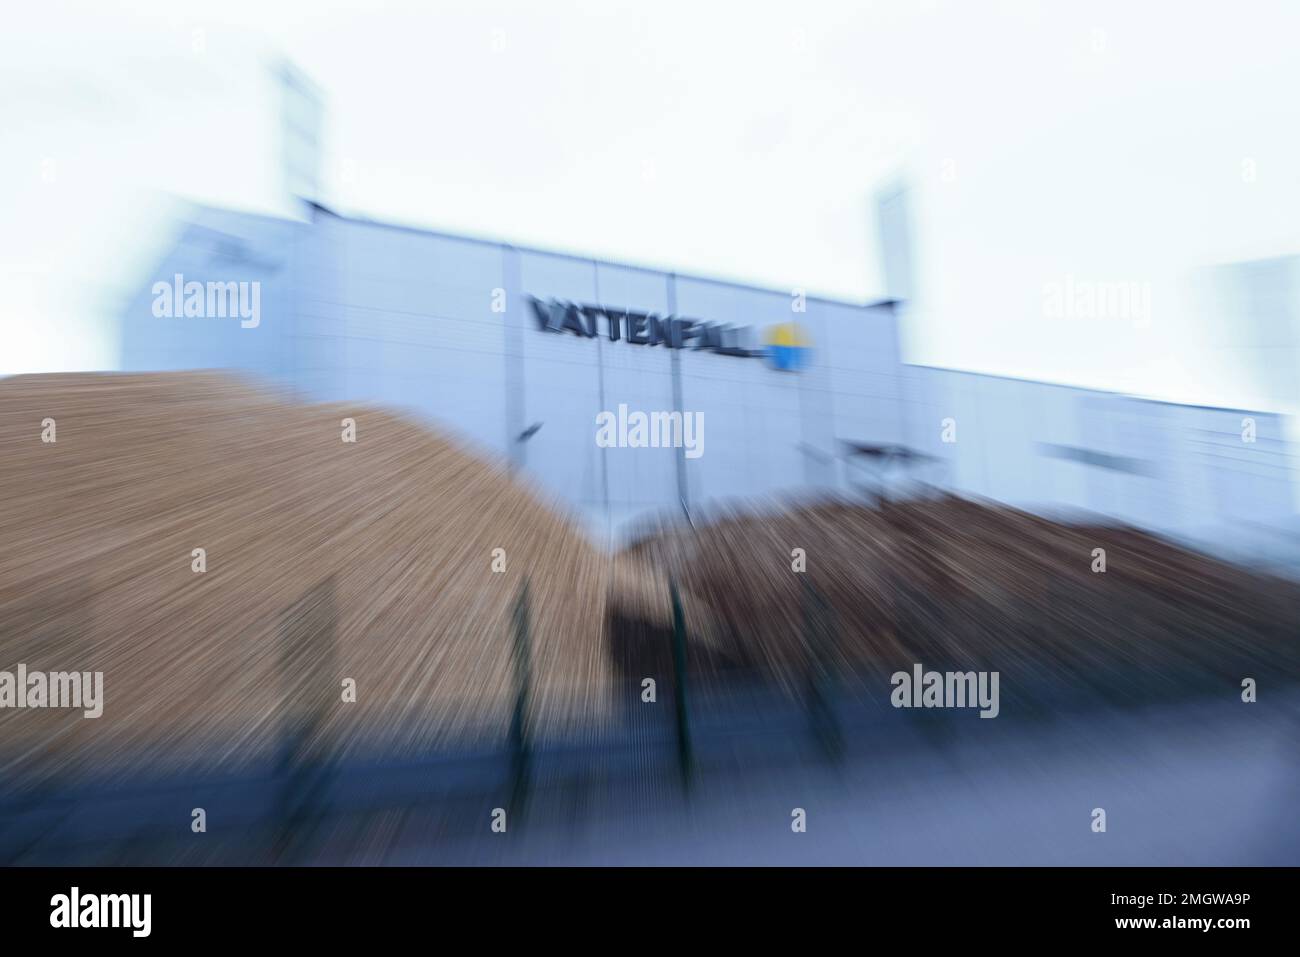 Vattenfall's CHP plant in Motala, Sweden. Here photographed during a long exposure time. Stock Photo